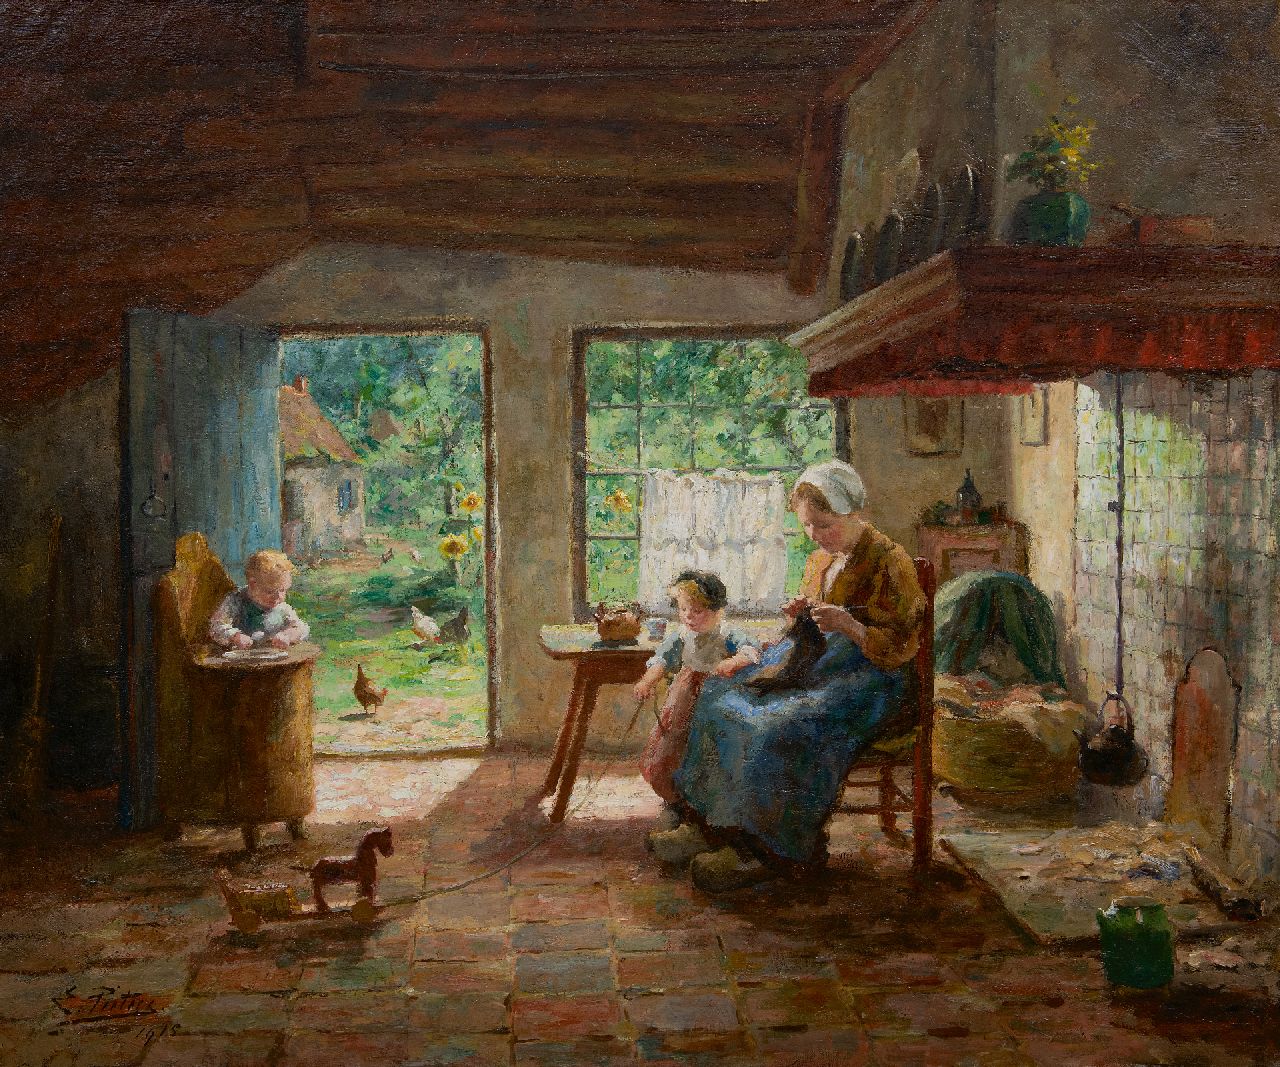 Pieters E.  | Evert Pieters | Paintings offered for sale | Mother and children in a sunny farmhouse interior, oil on canvas 78.5 x 92.4 cm, signed l.l. and dated 1915